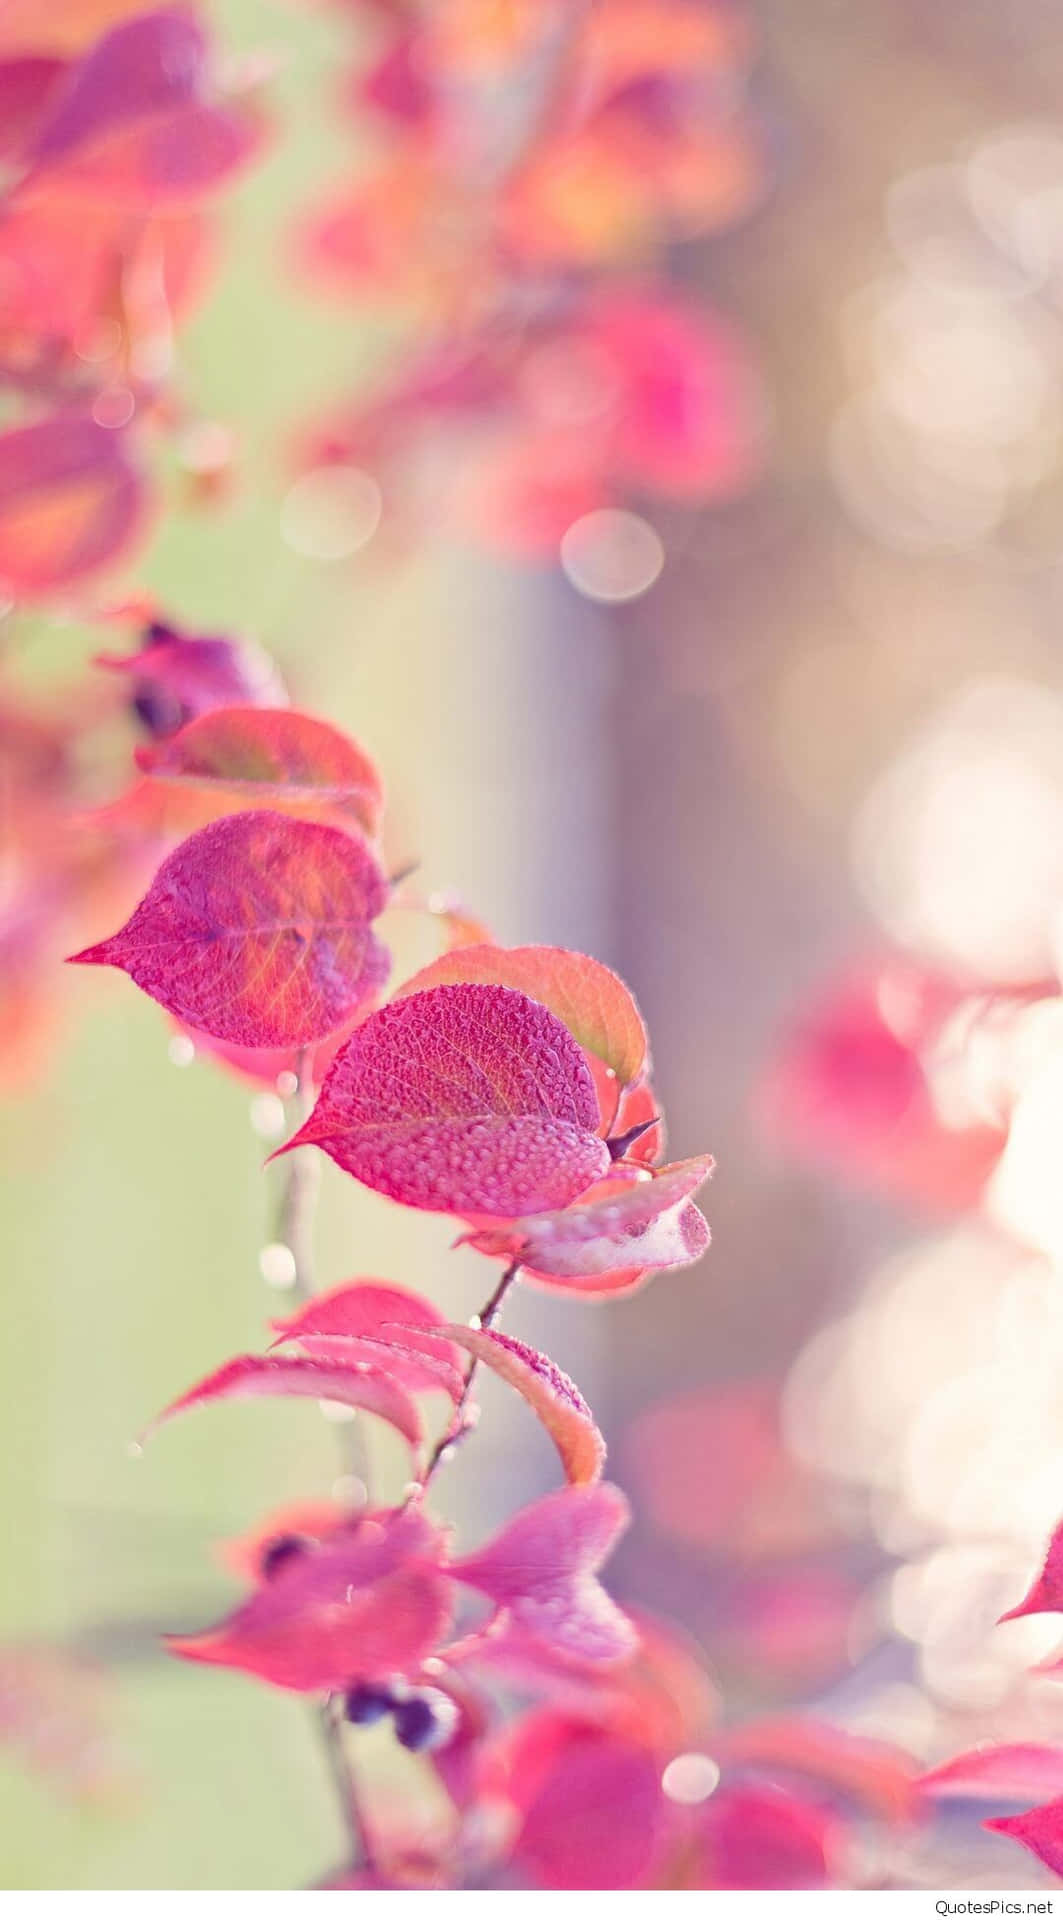 Tumblr Photography Pink Leaves Sunlight Wallpaper